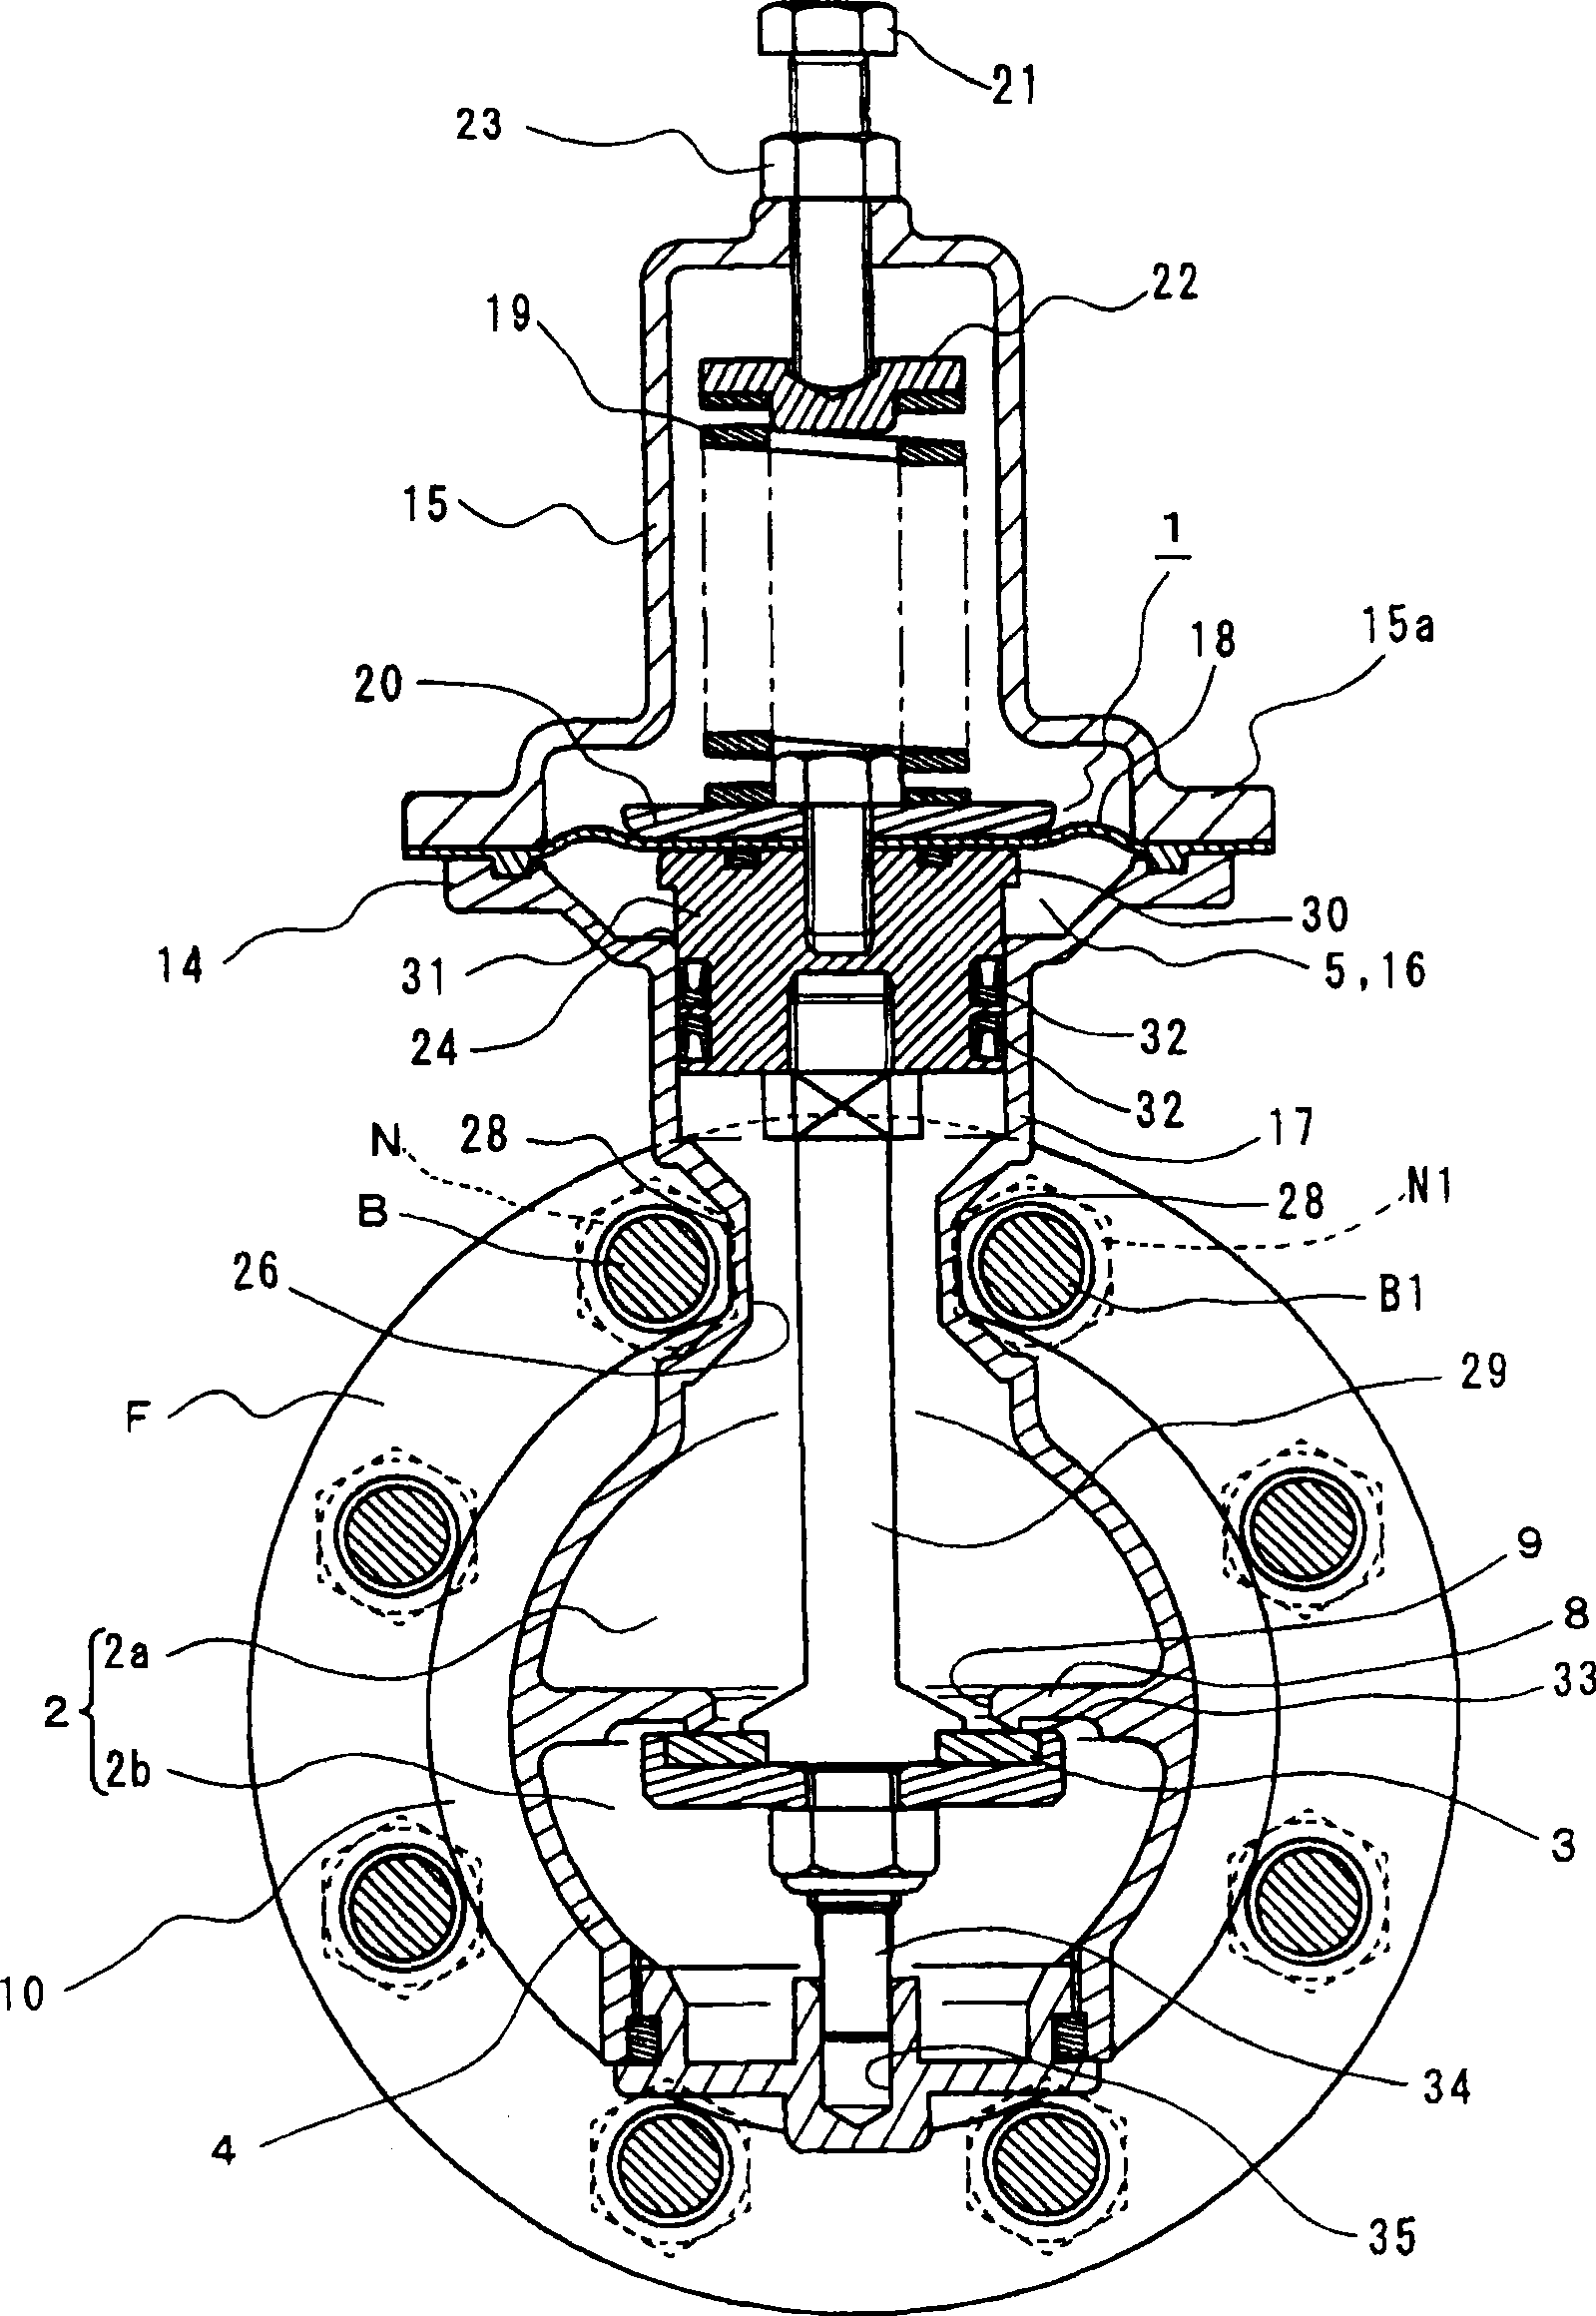 Oppositely clamped type direct-acting valve